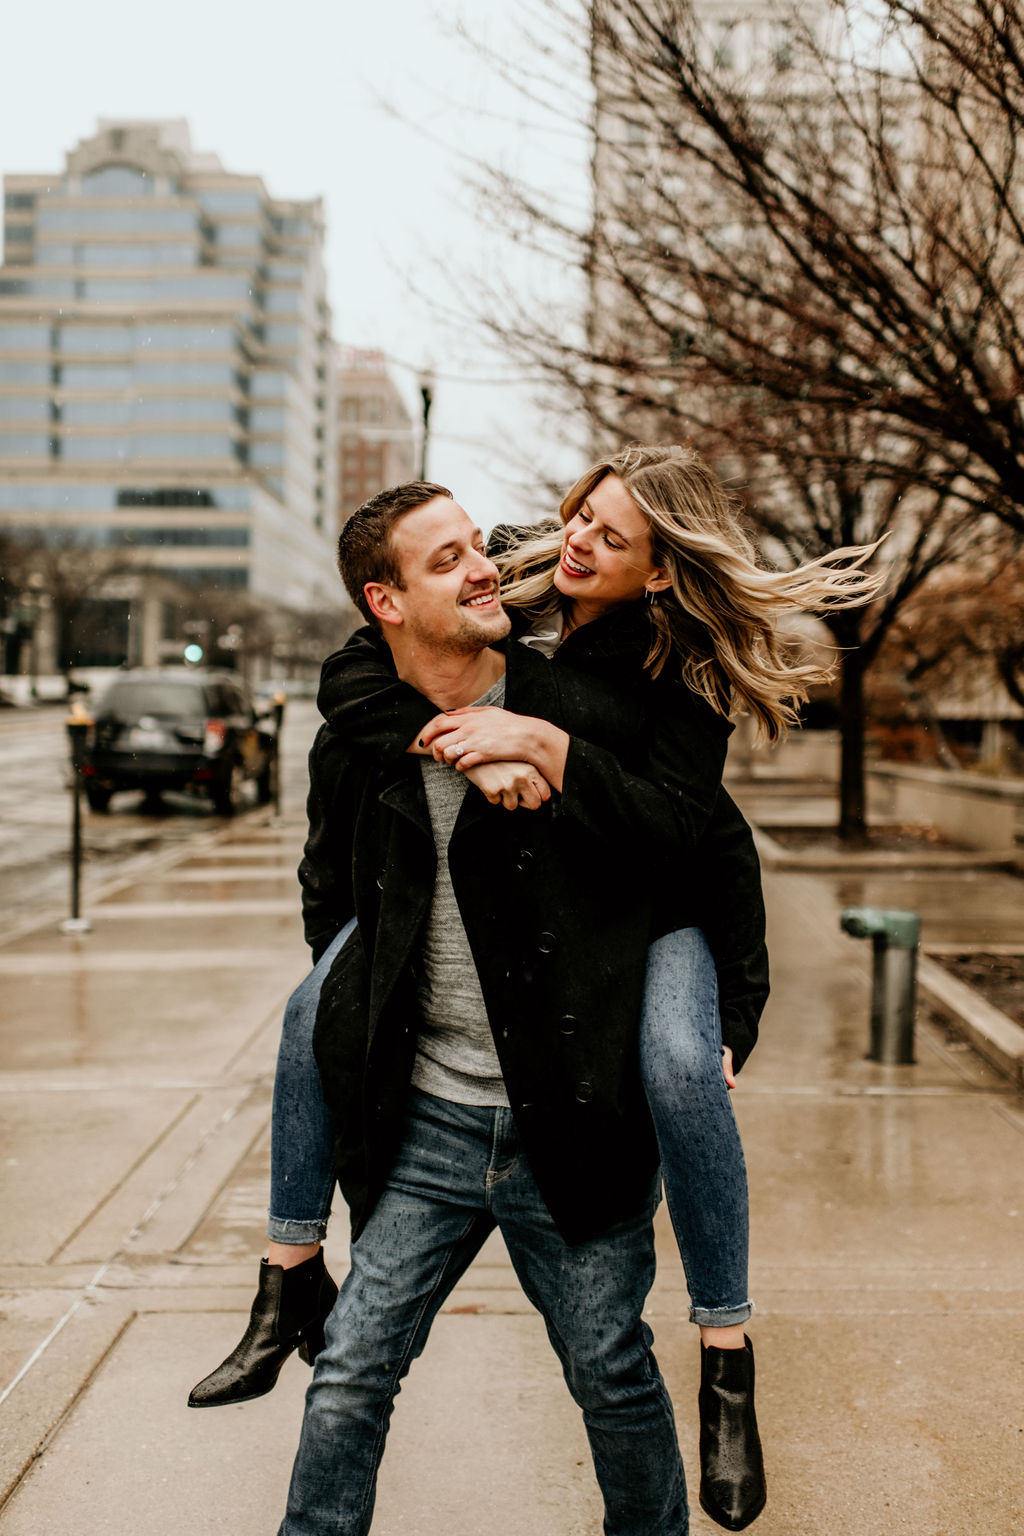 Peoria Illinois Engagement Session with Photographs by Teresa 1